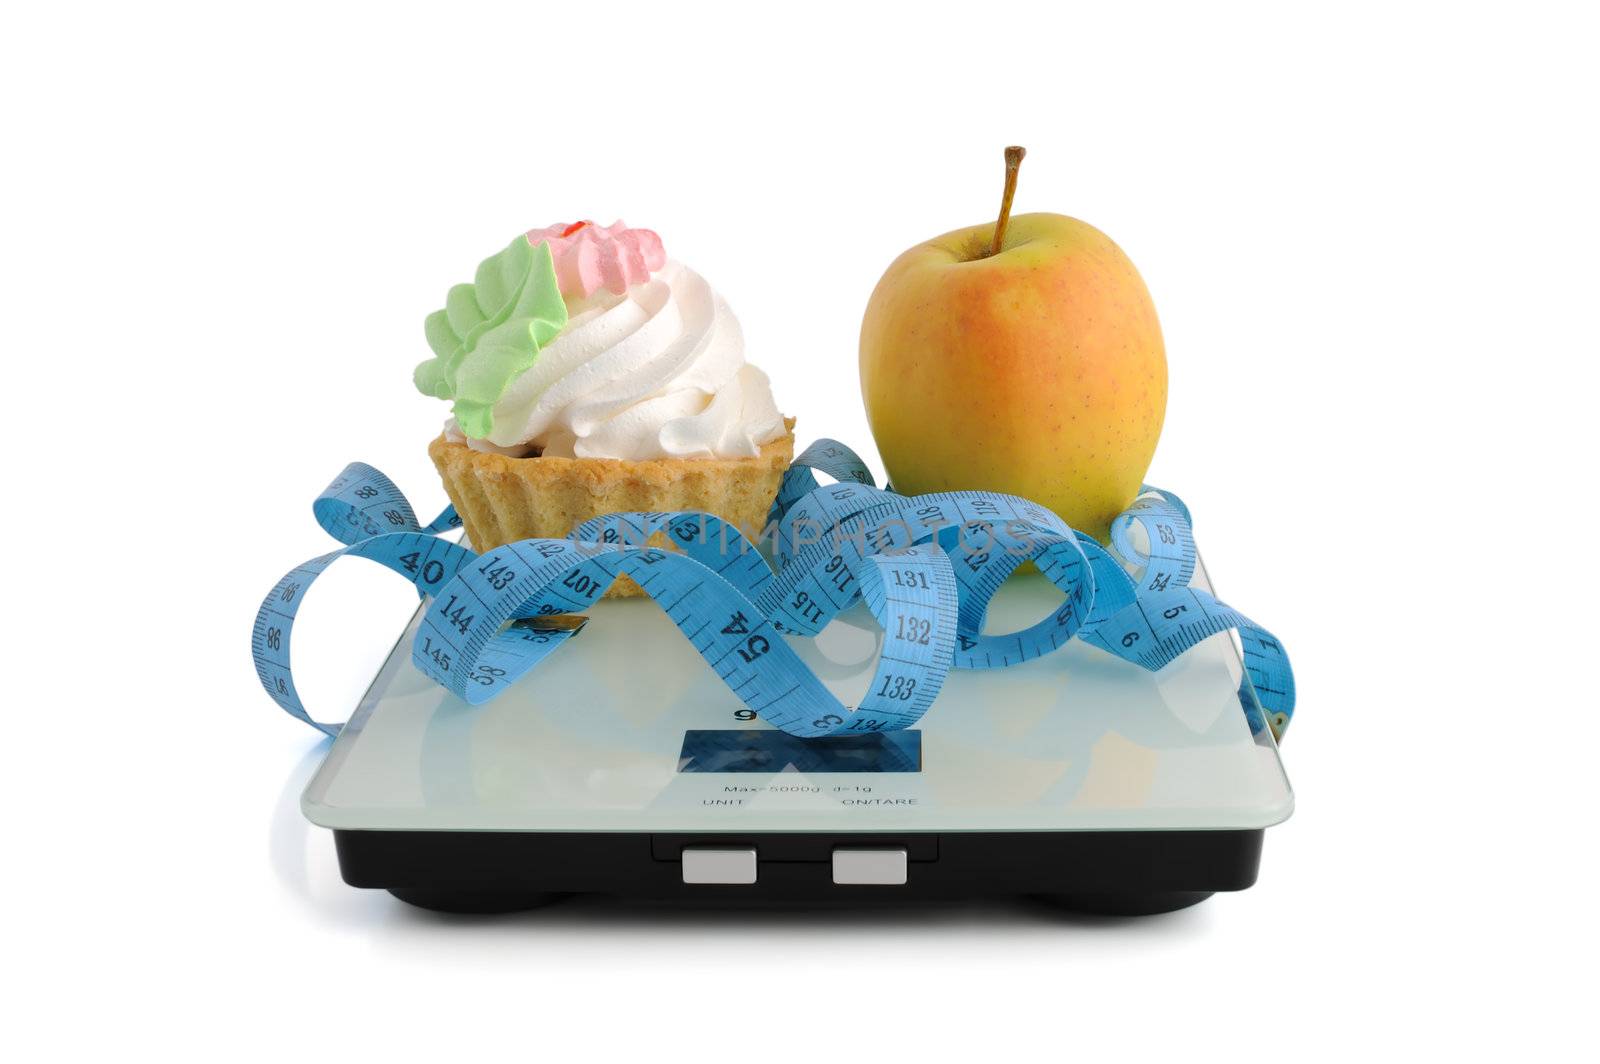 The dilemma of cake or an apple wrapped in the centimeter scale on white background (isolated)